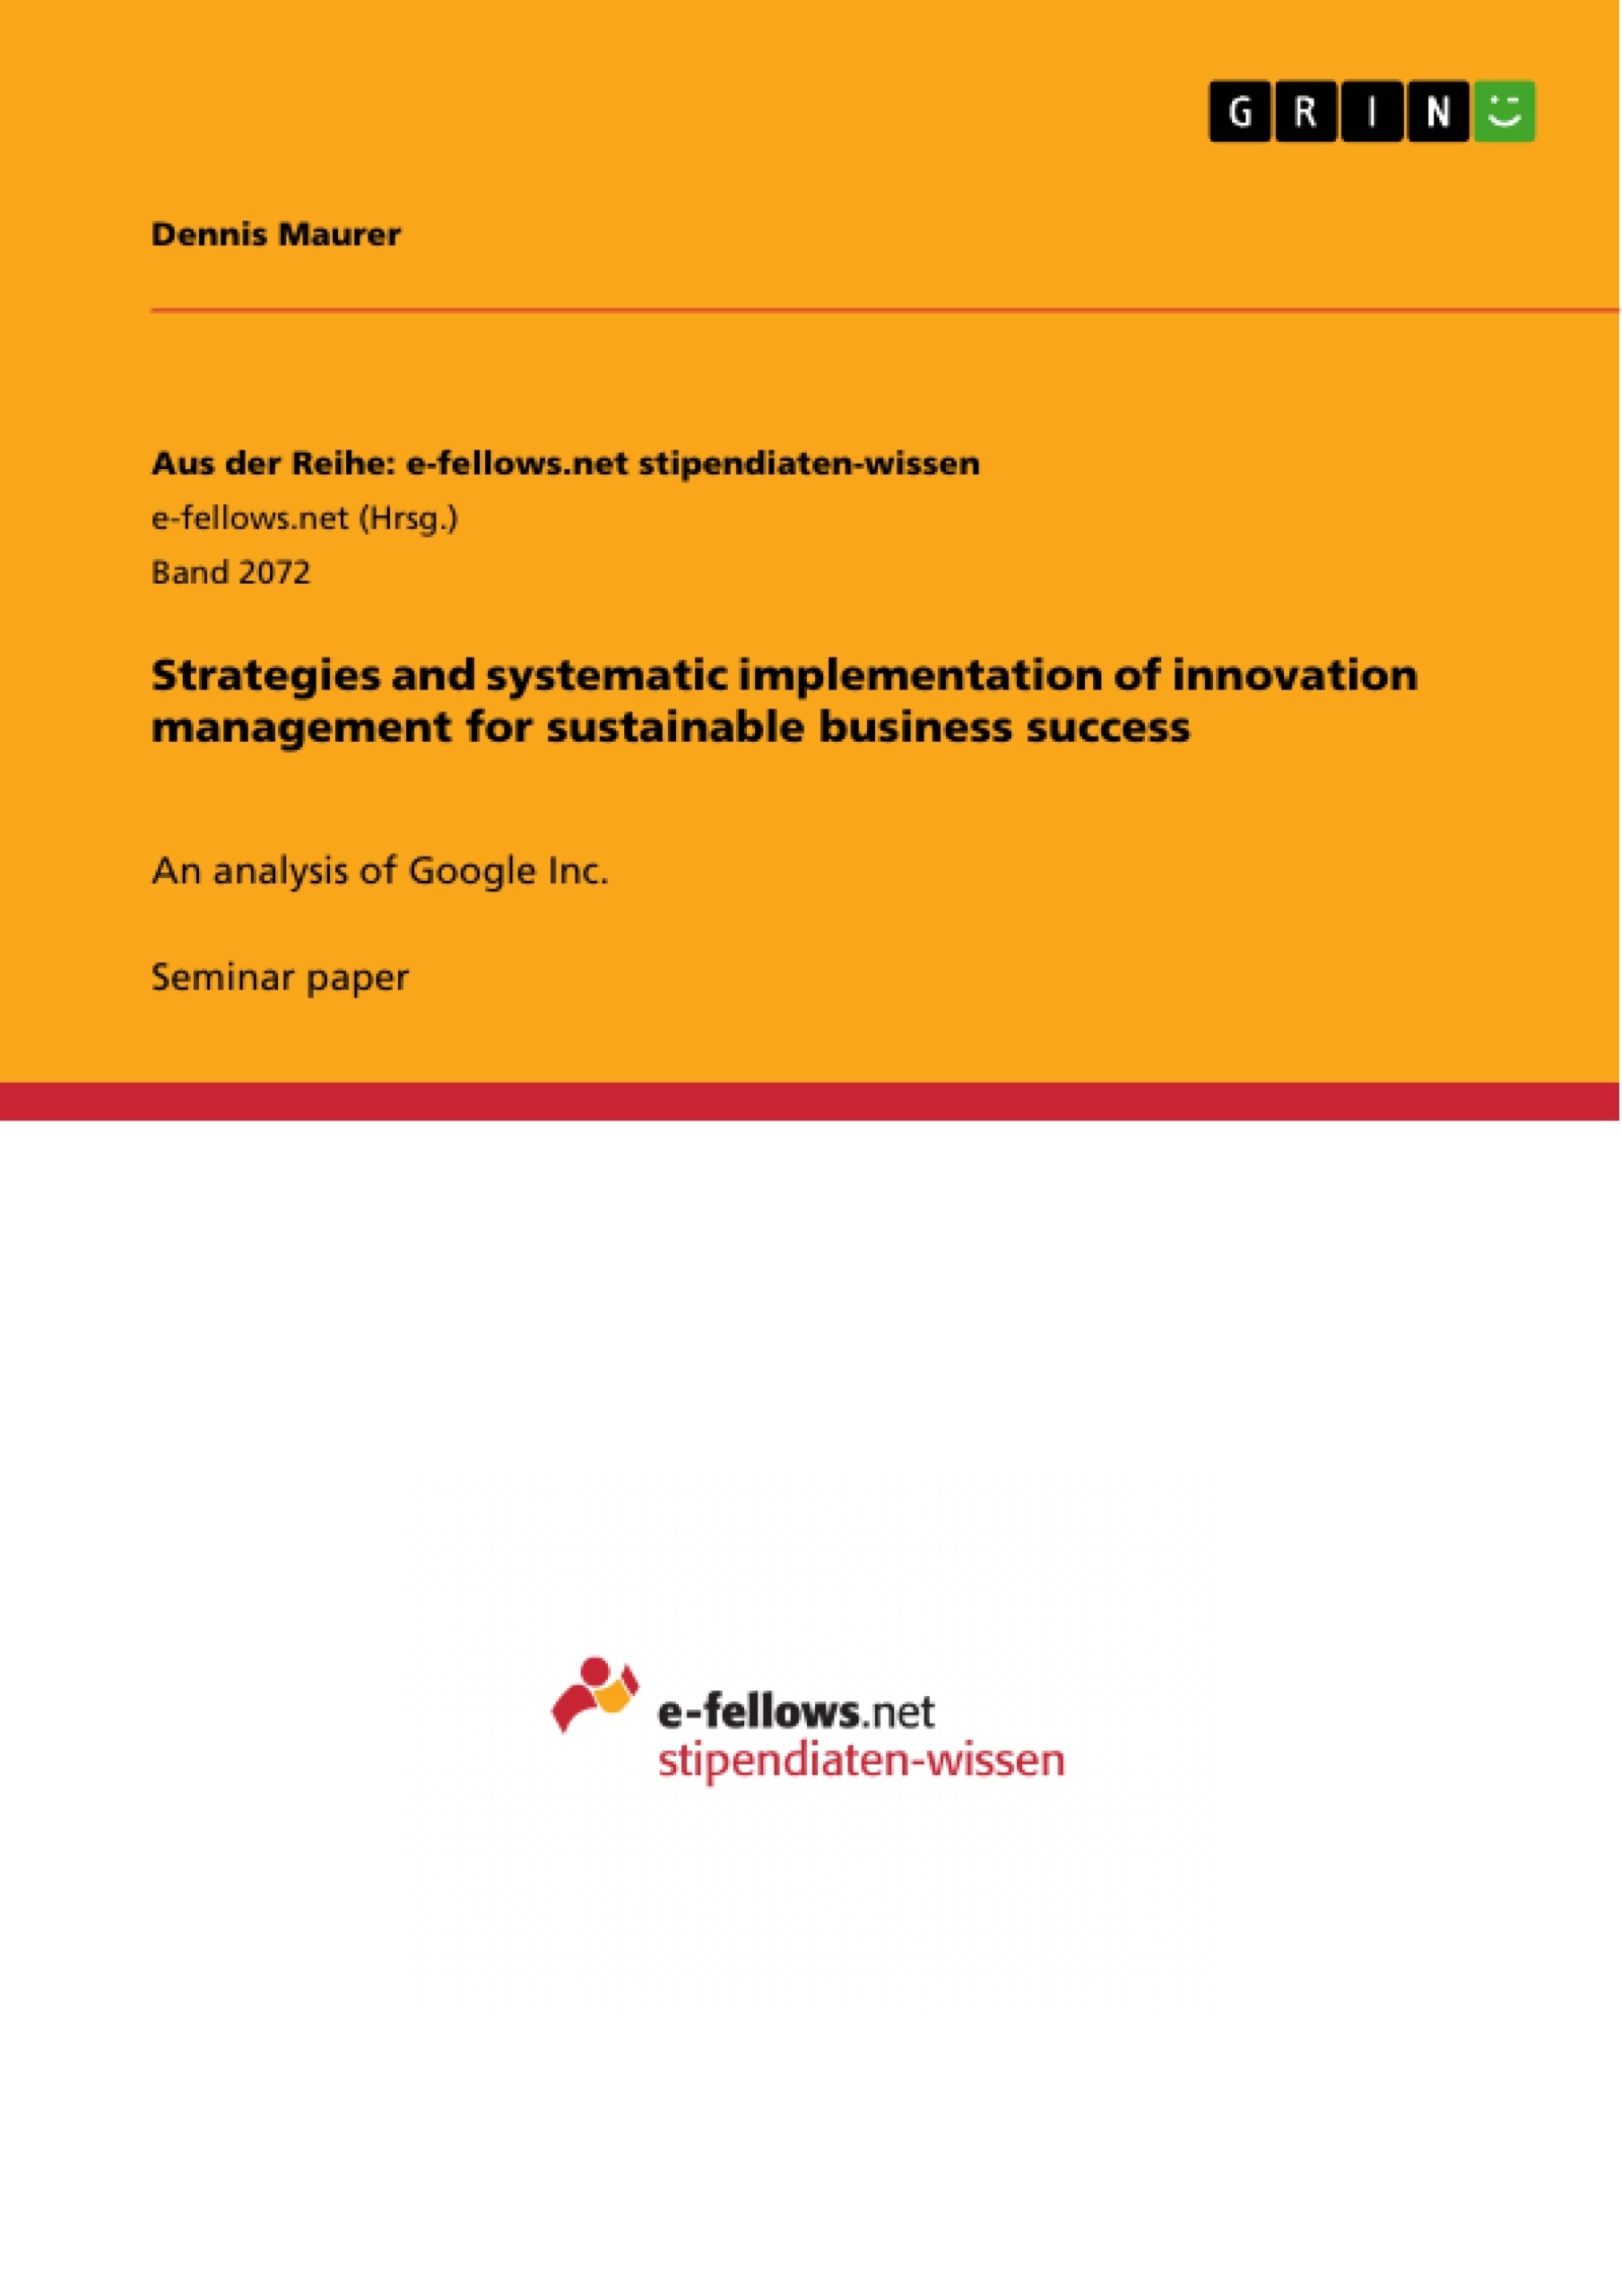 Title: Strategies and systematic implementation of innovation management for sustainable business success